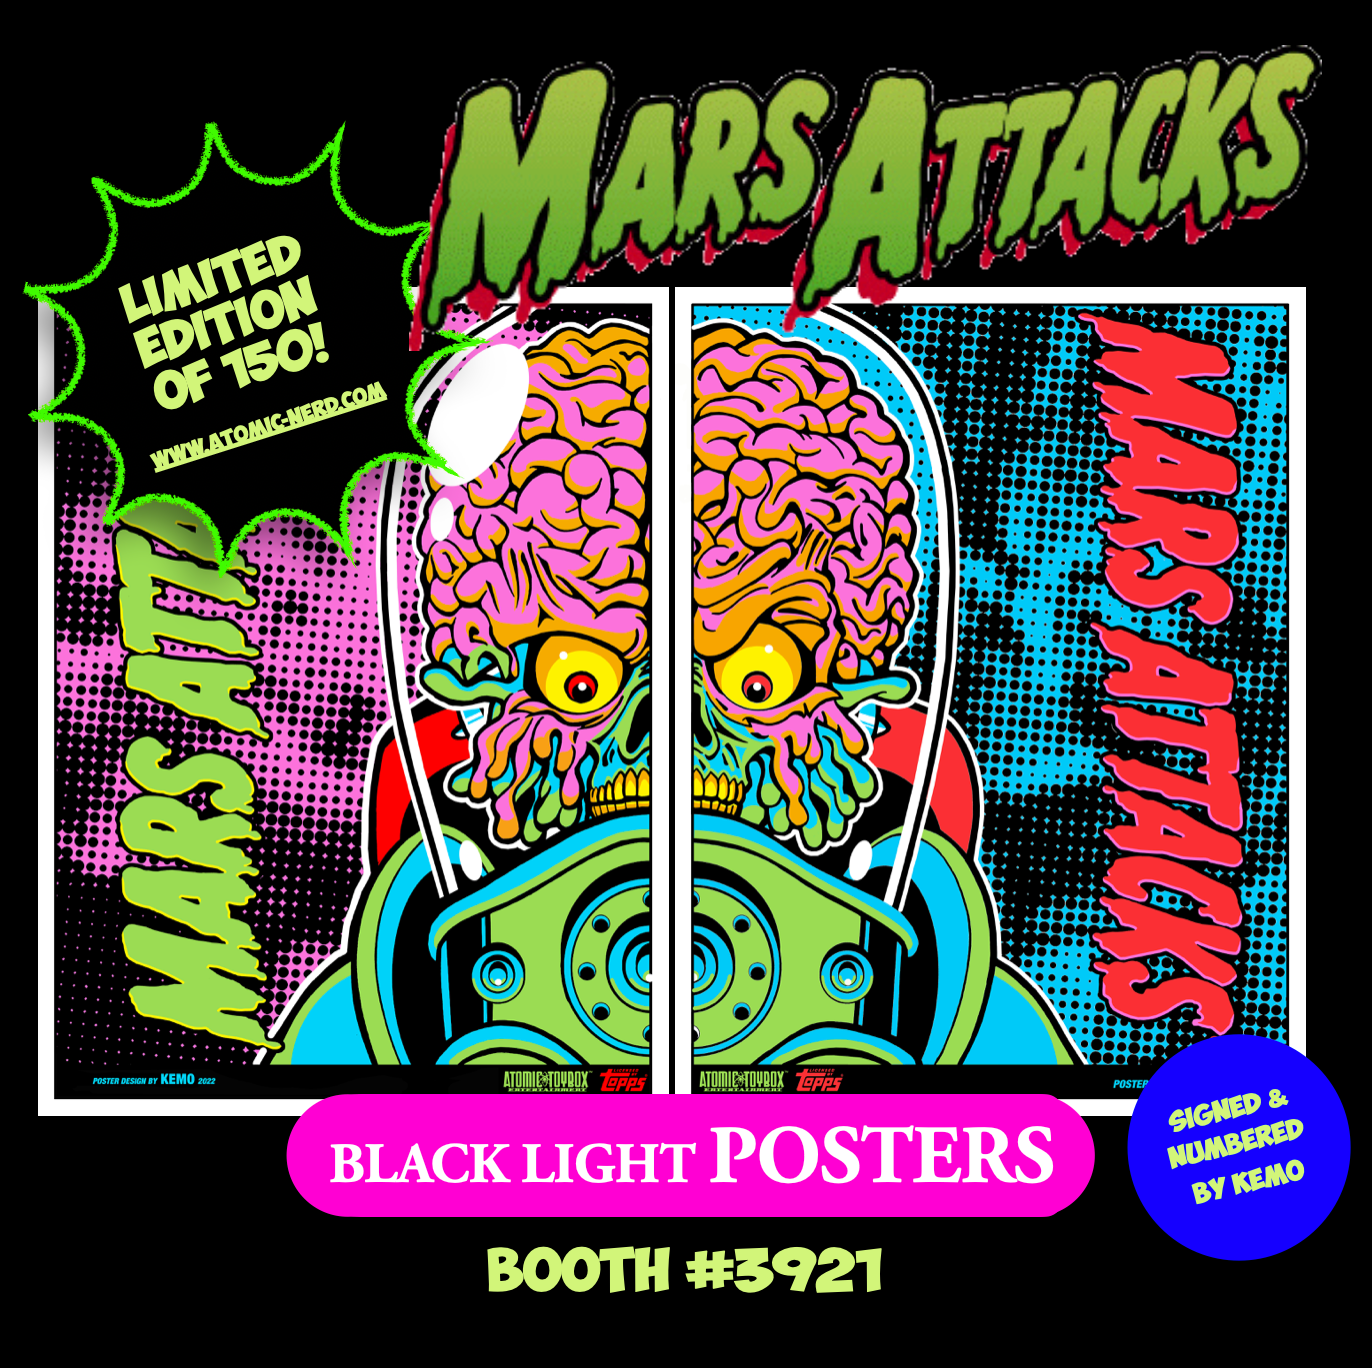 Mars Attacks, Topps, Atomic-nerd, poster, collectible, limited edition